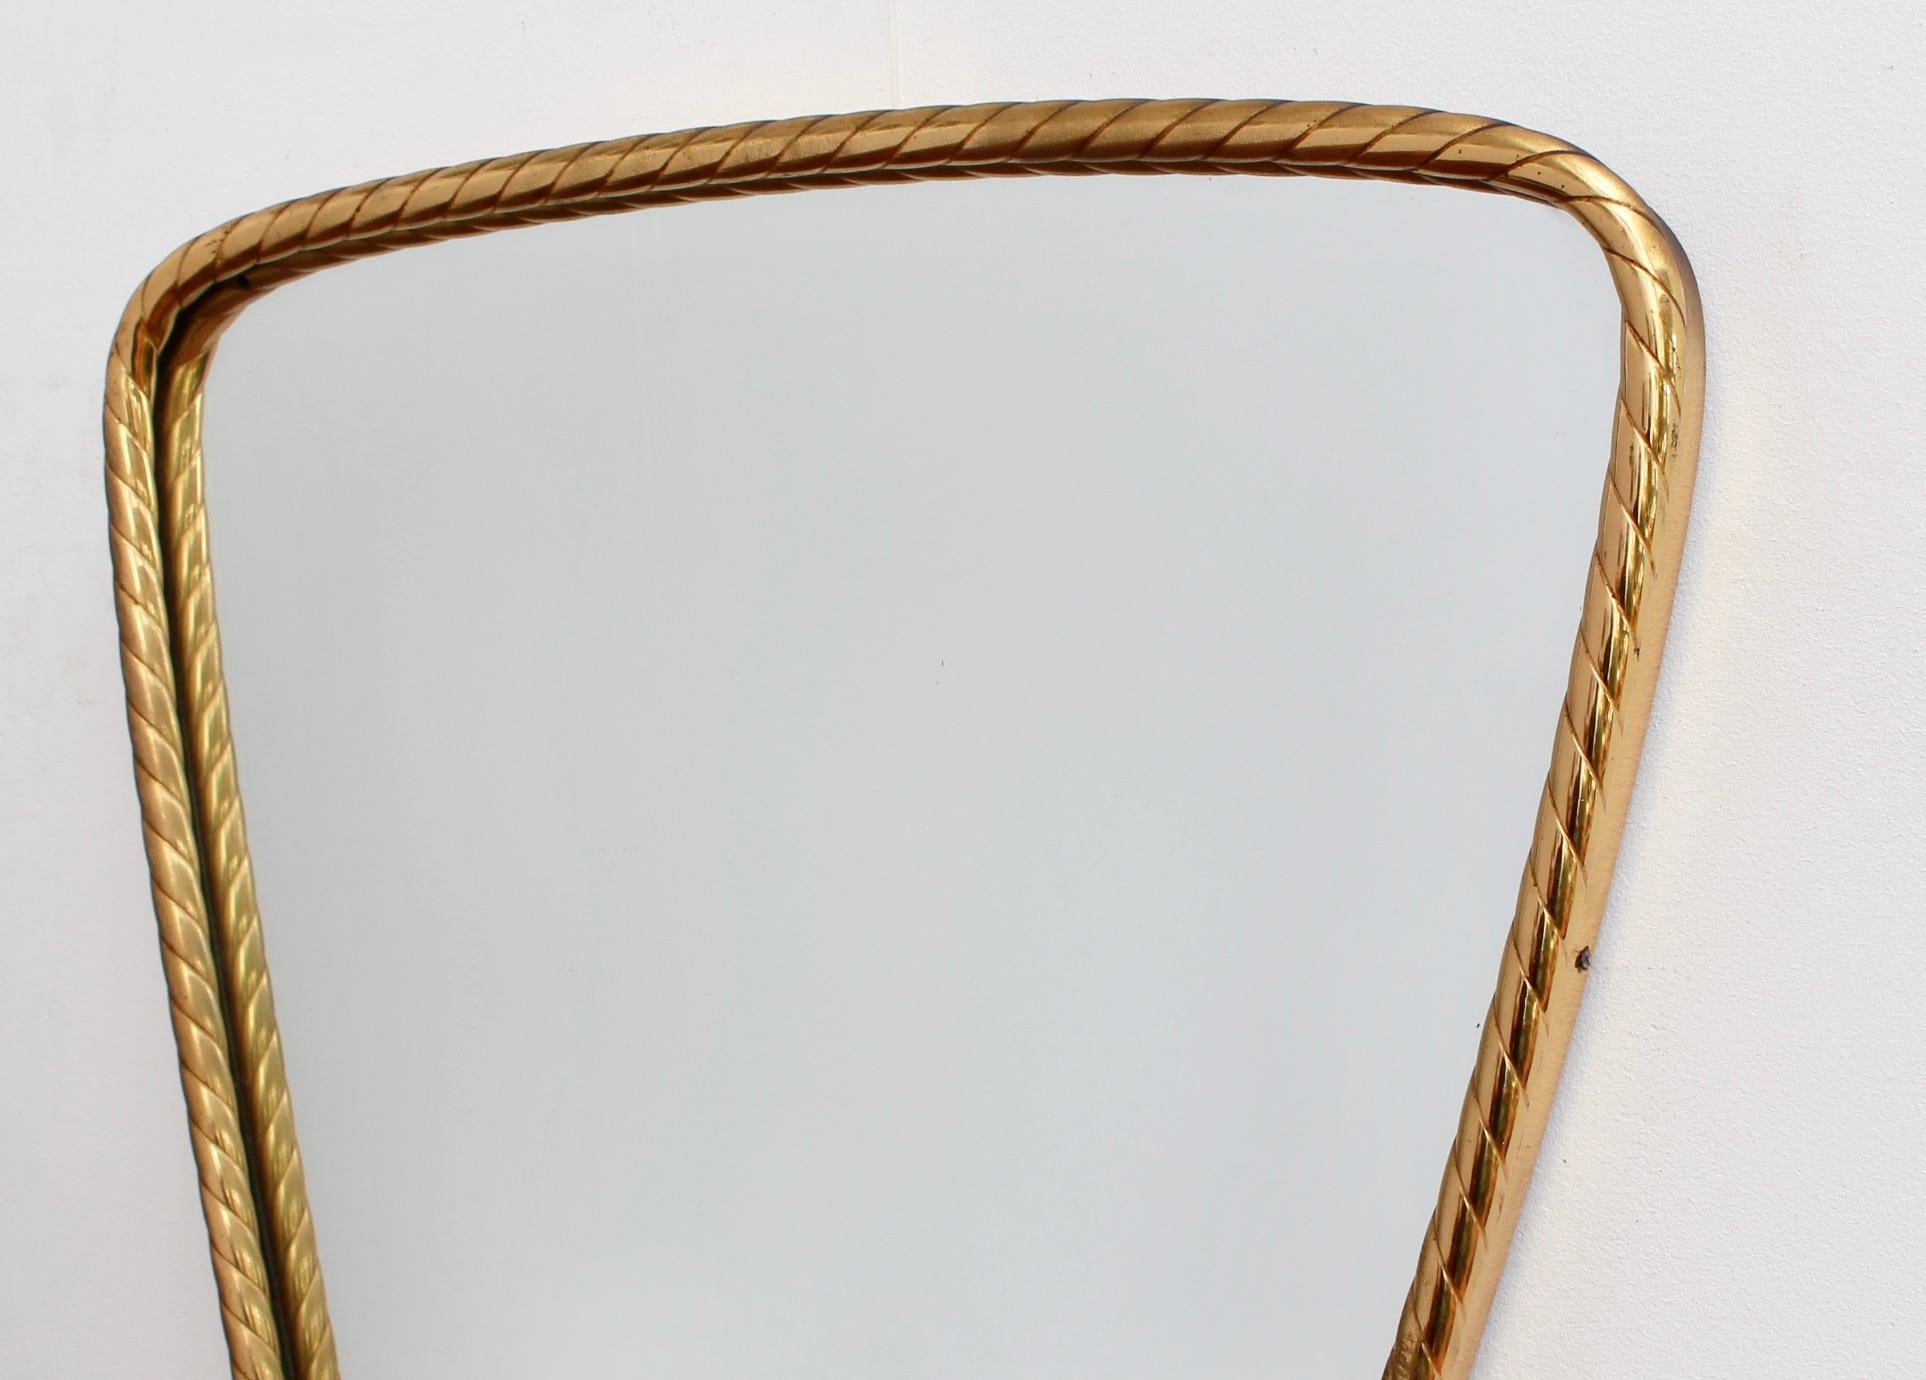 Midcentury Italian Keyhole-Shaped Wall Mirror with Rope Pattern Brass Frame 2